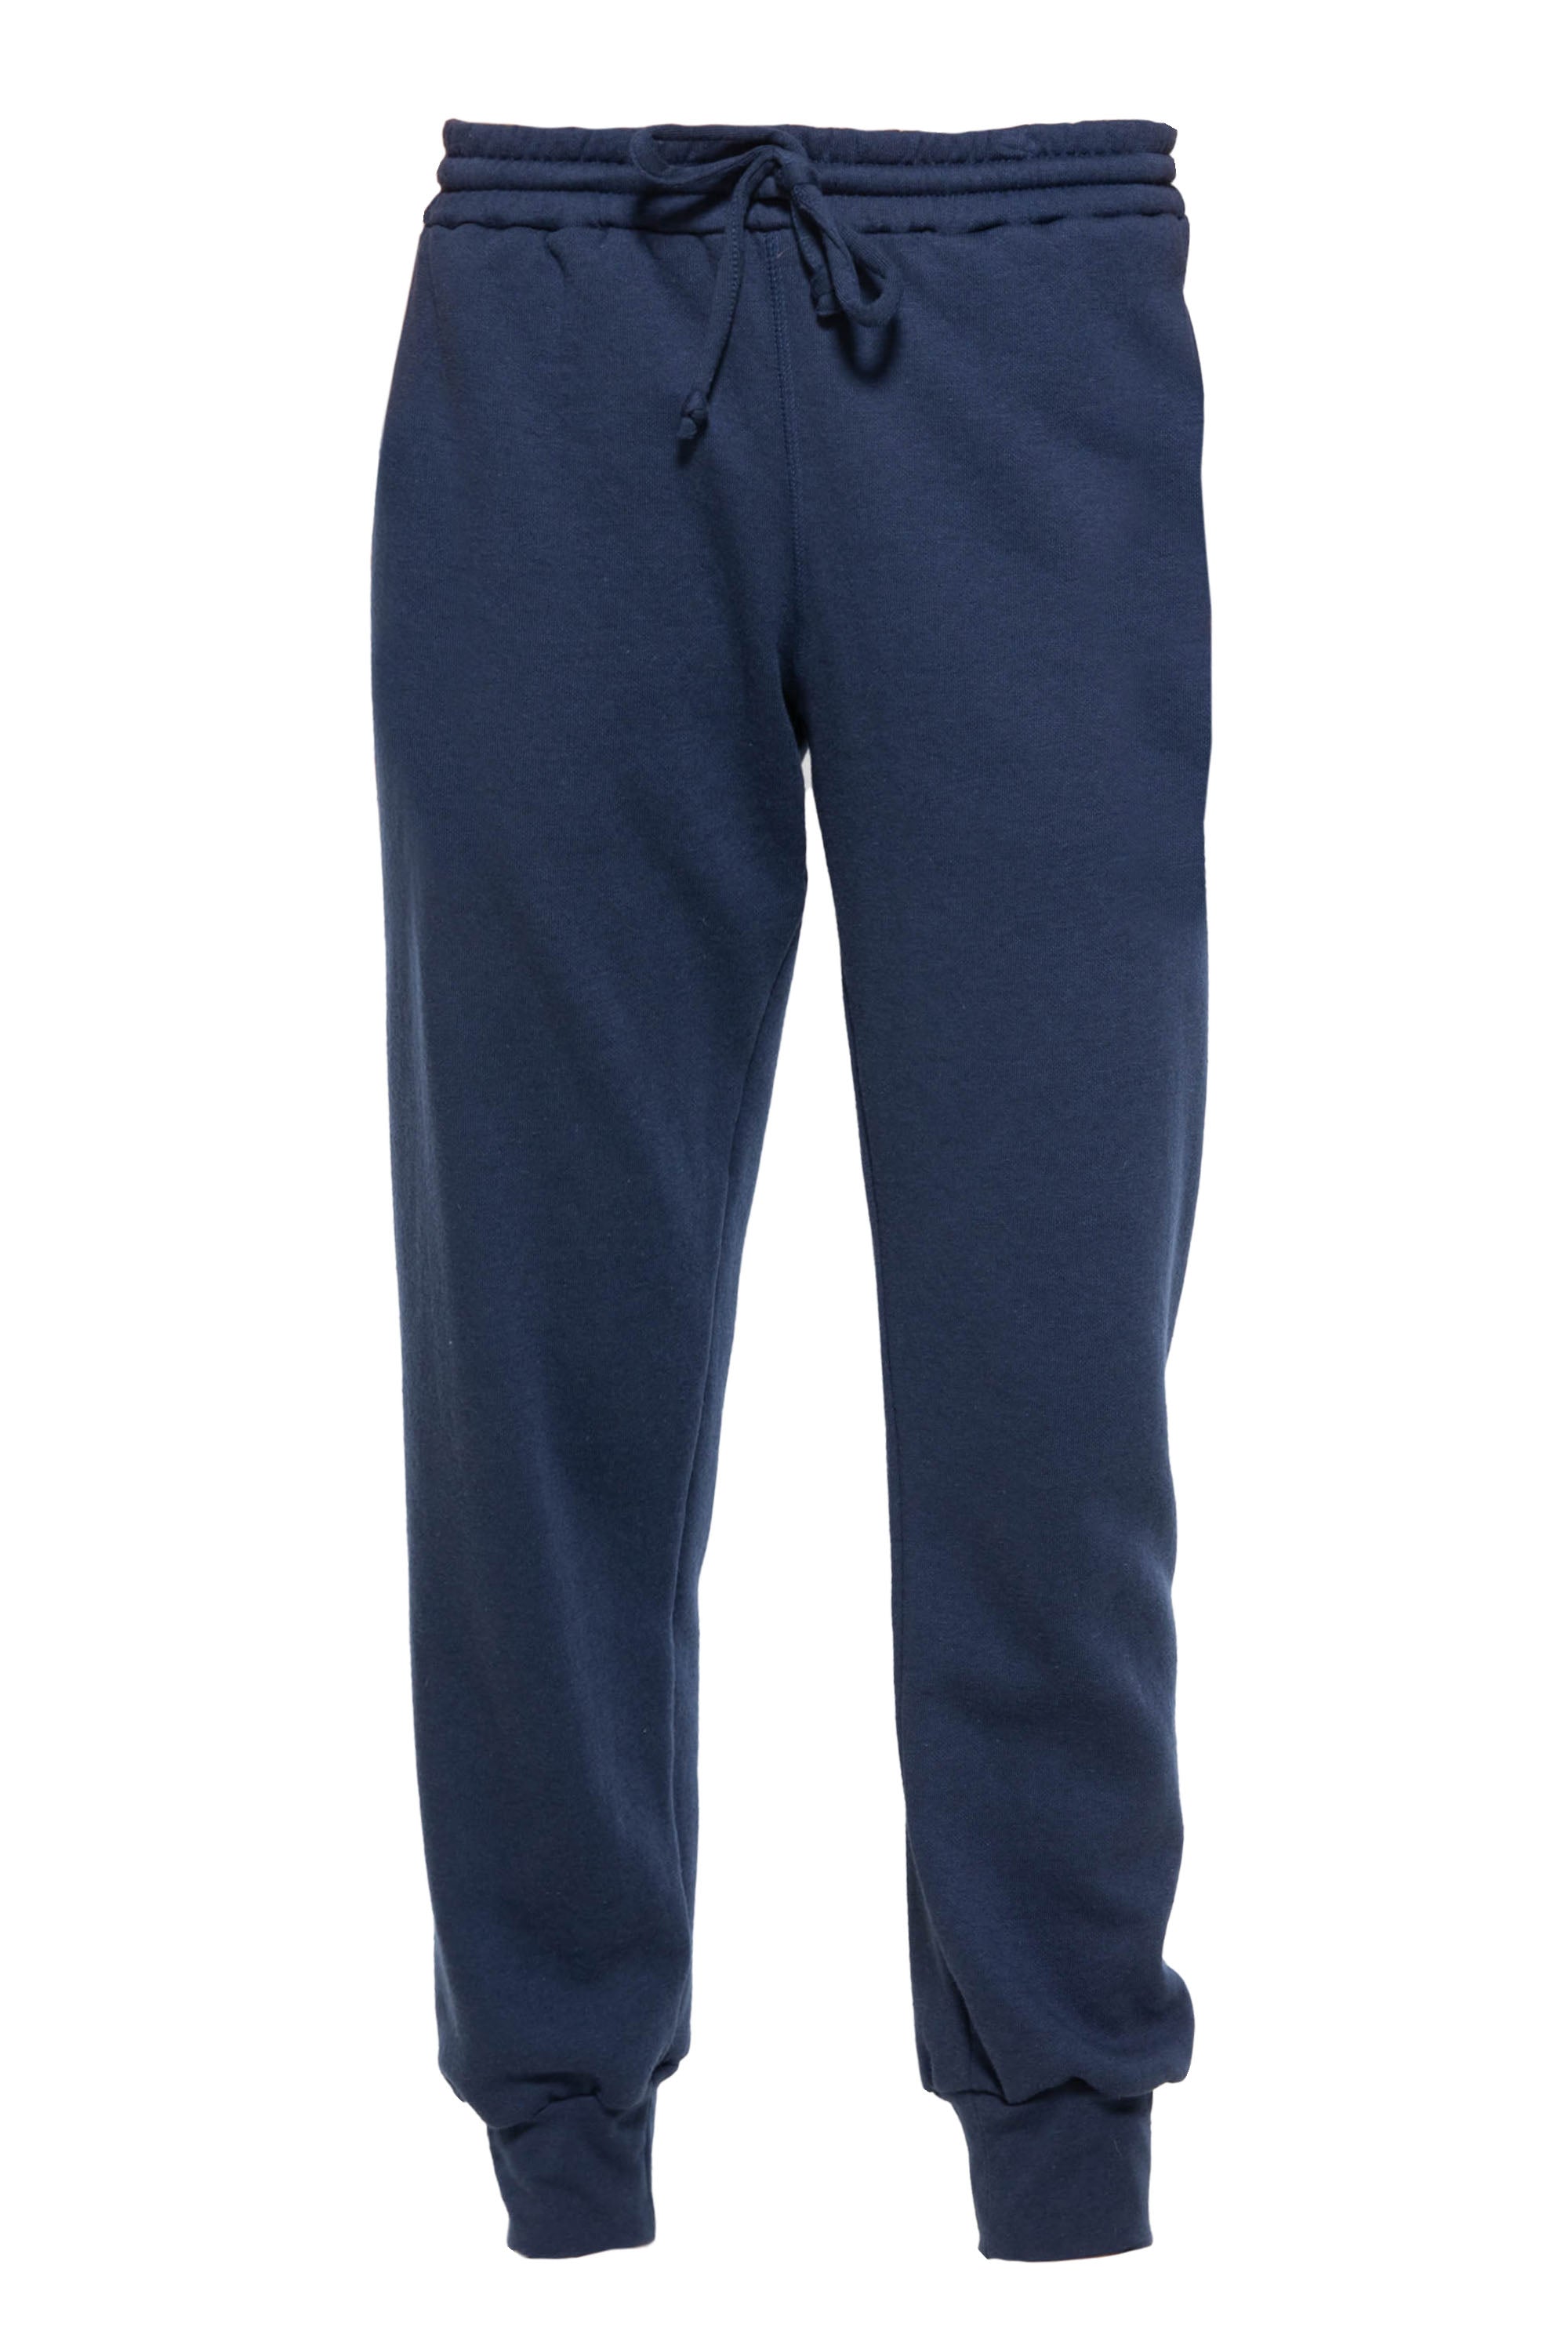 FITTED JOGGER - NAVY